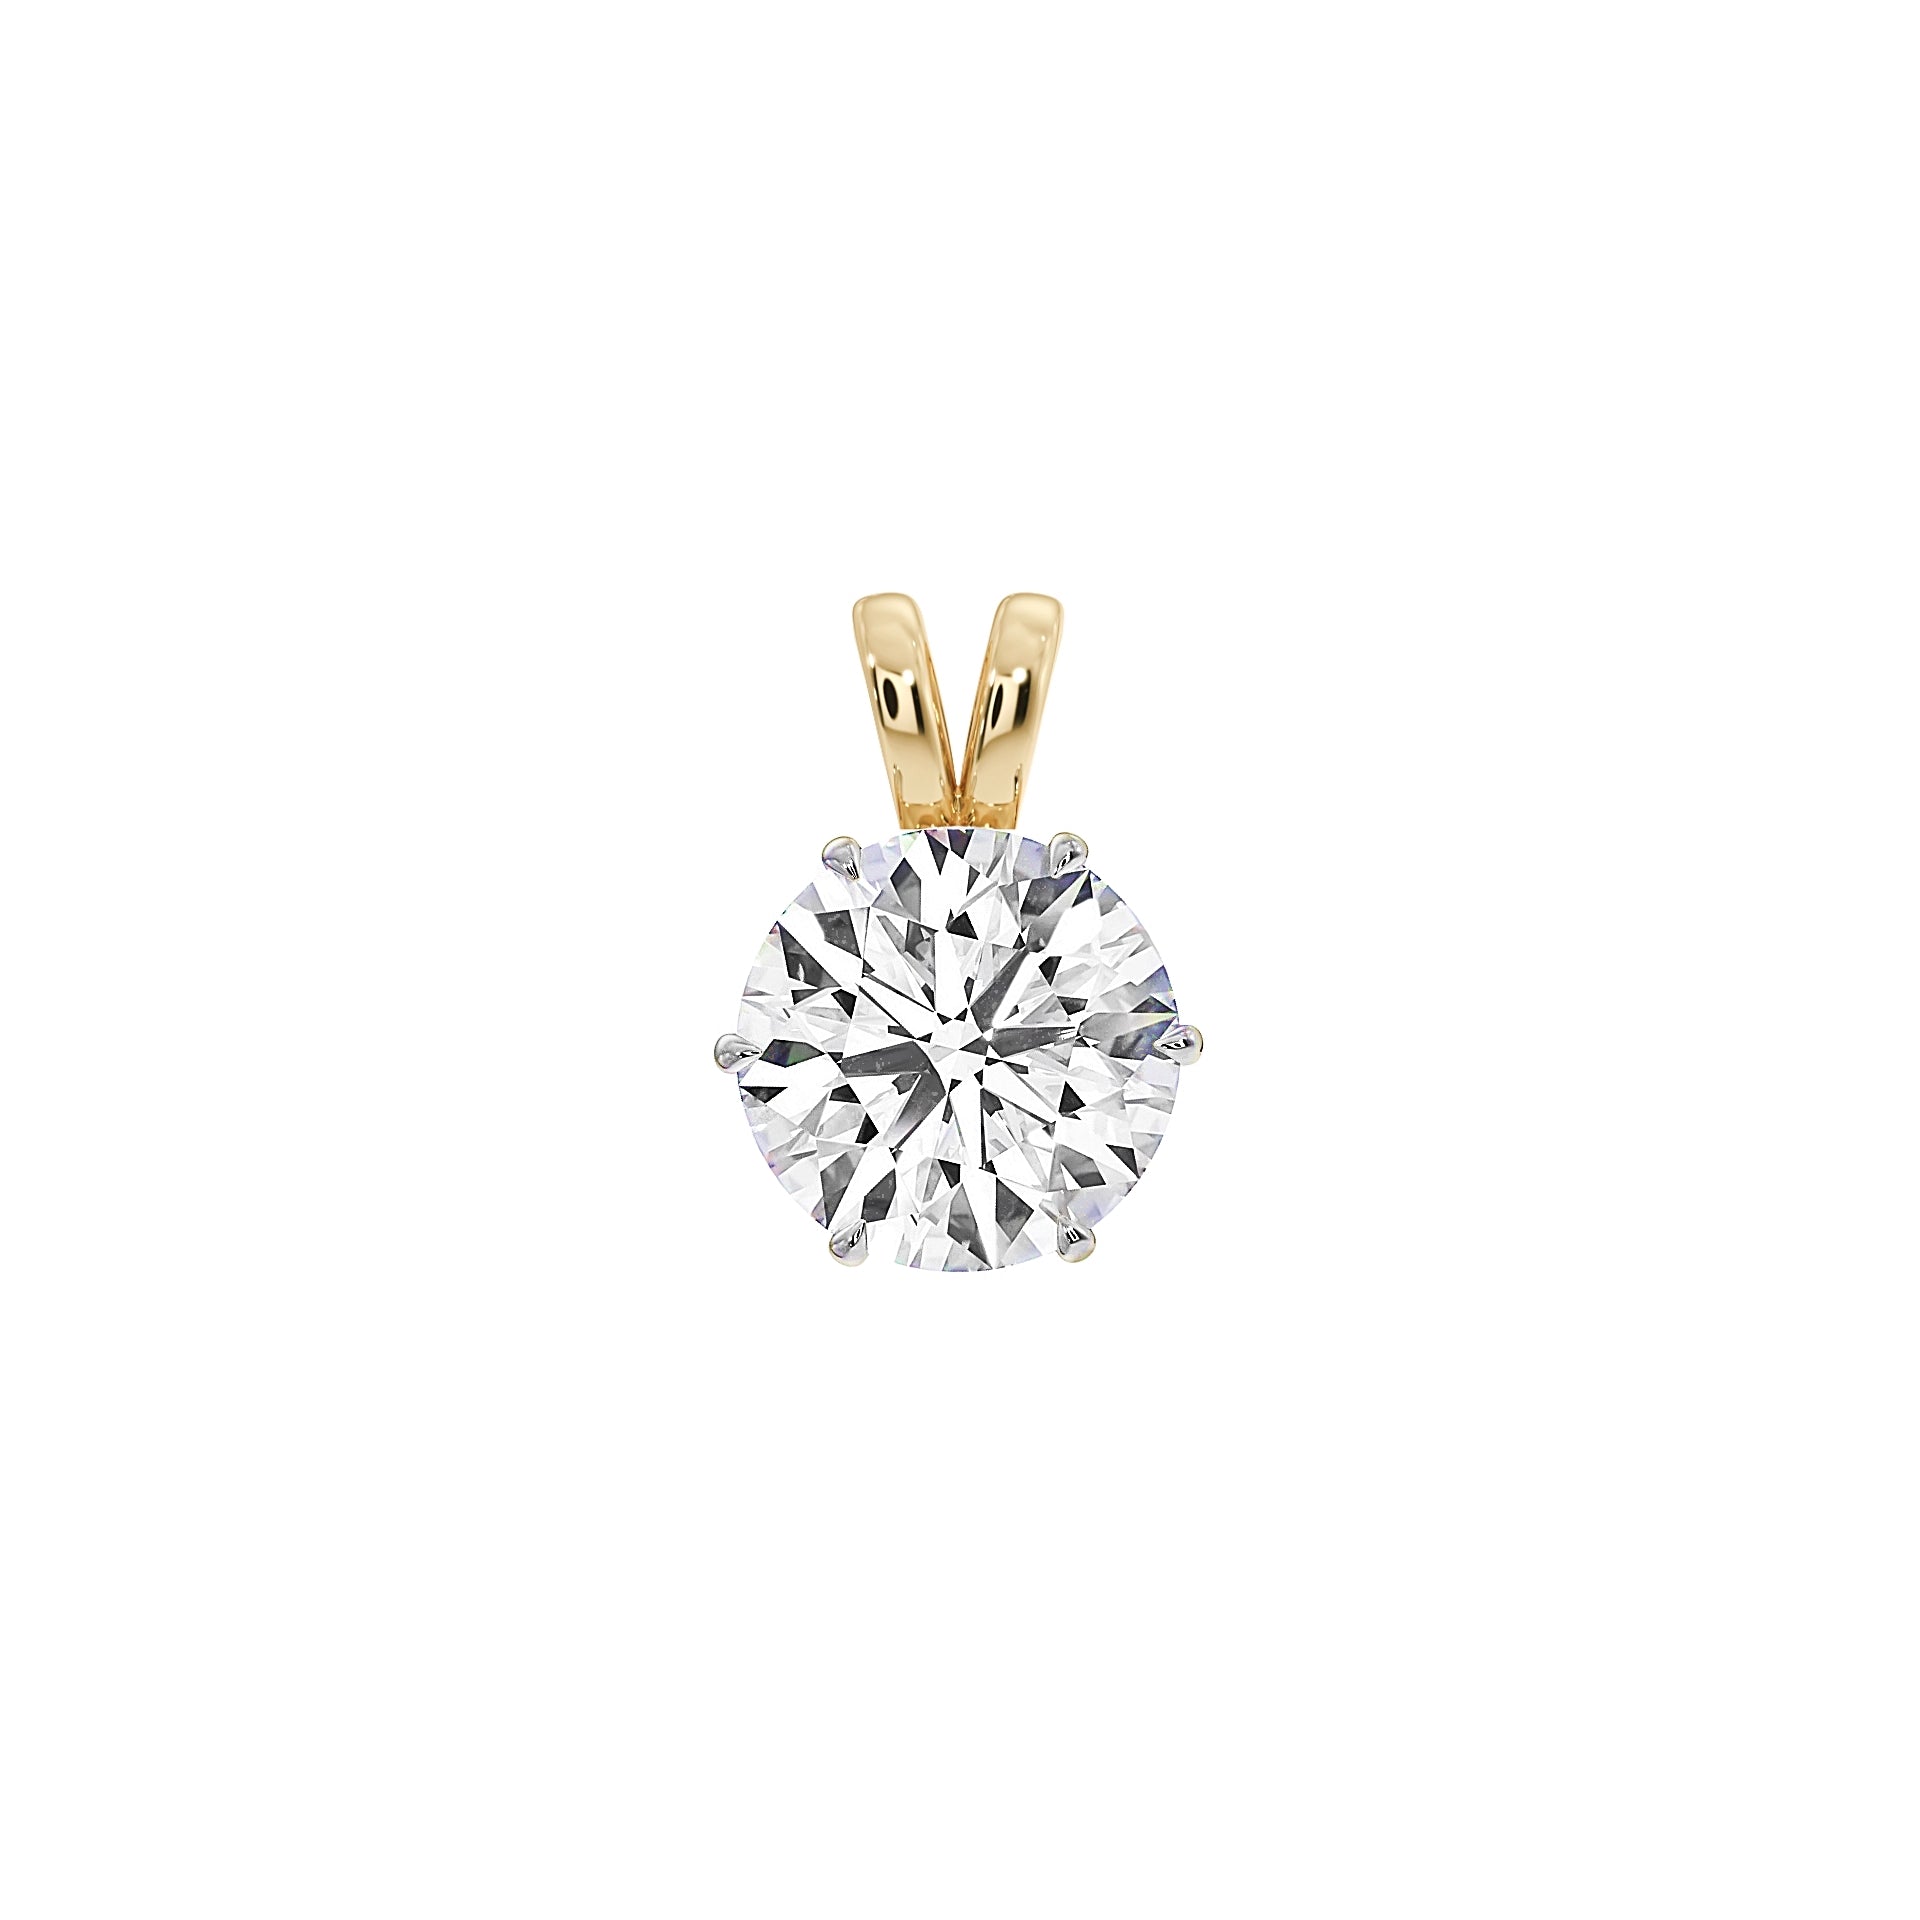 Front view of MYZA 1 carat IGI certified lab-grown diamond Pendant for women delicately set in secure six-prong settings crafted in 18kt hallmark yellow gold.